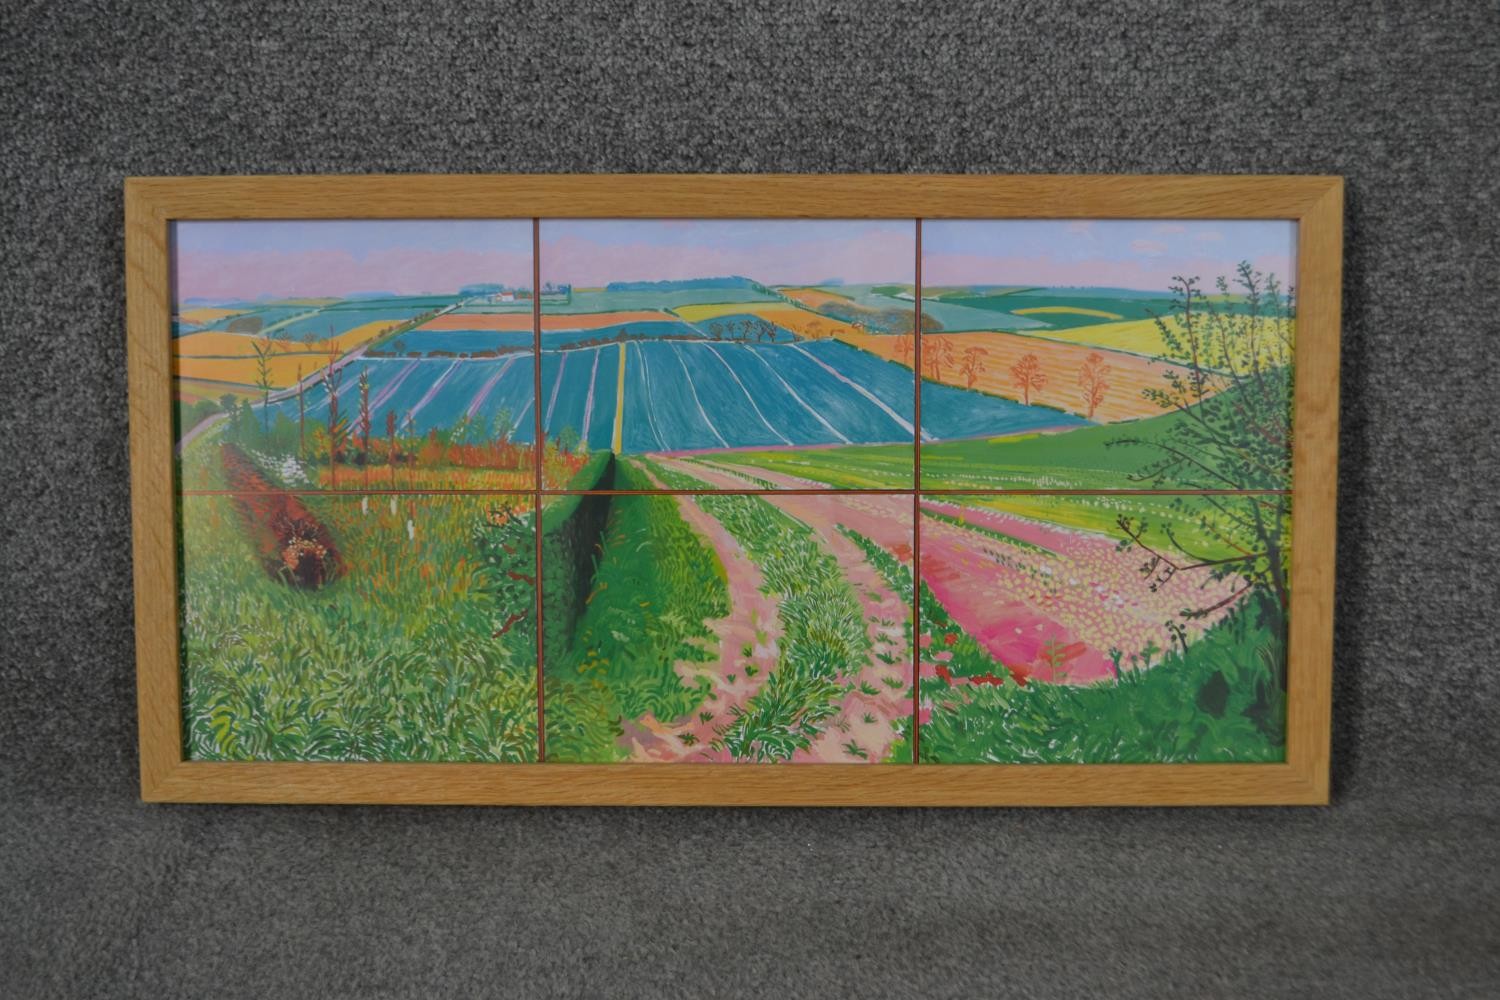 Six framed and glazed limited edition 20th century David Hockney prints of various paintings, - Image 5 of 12